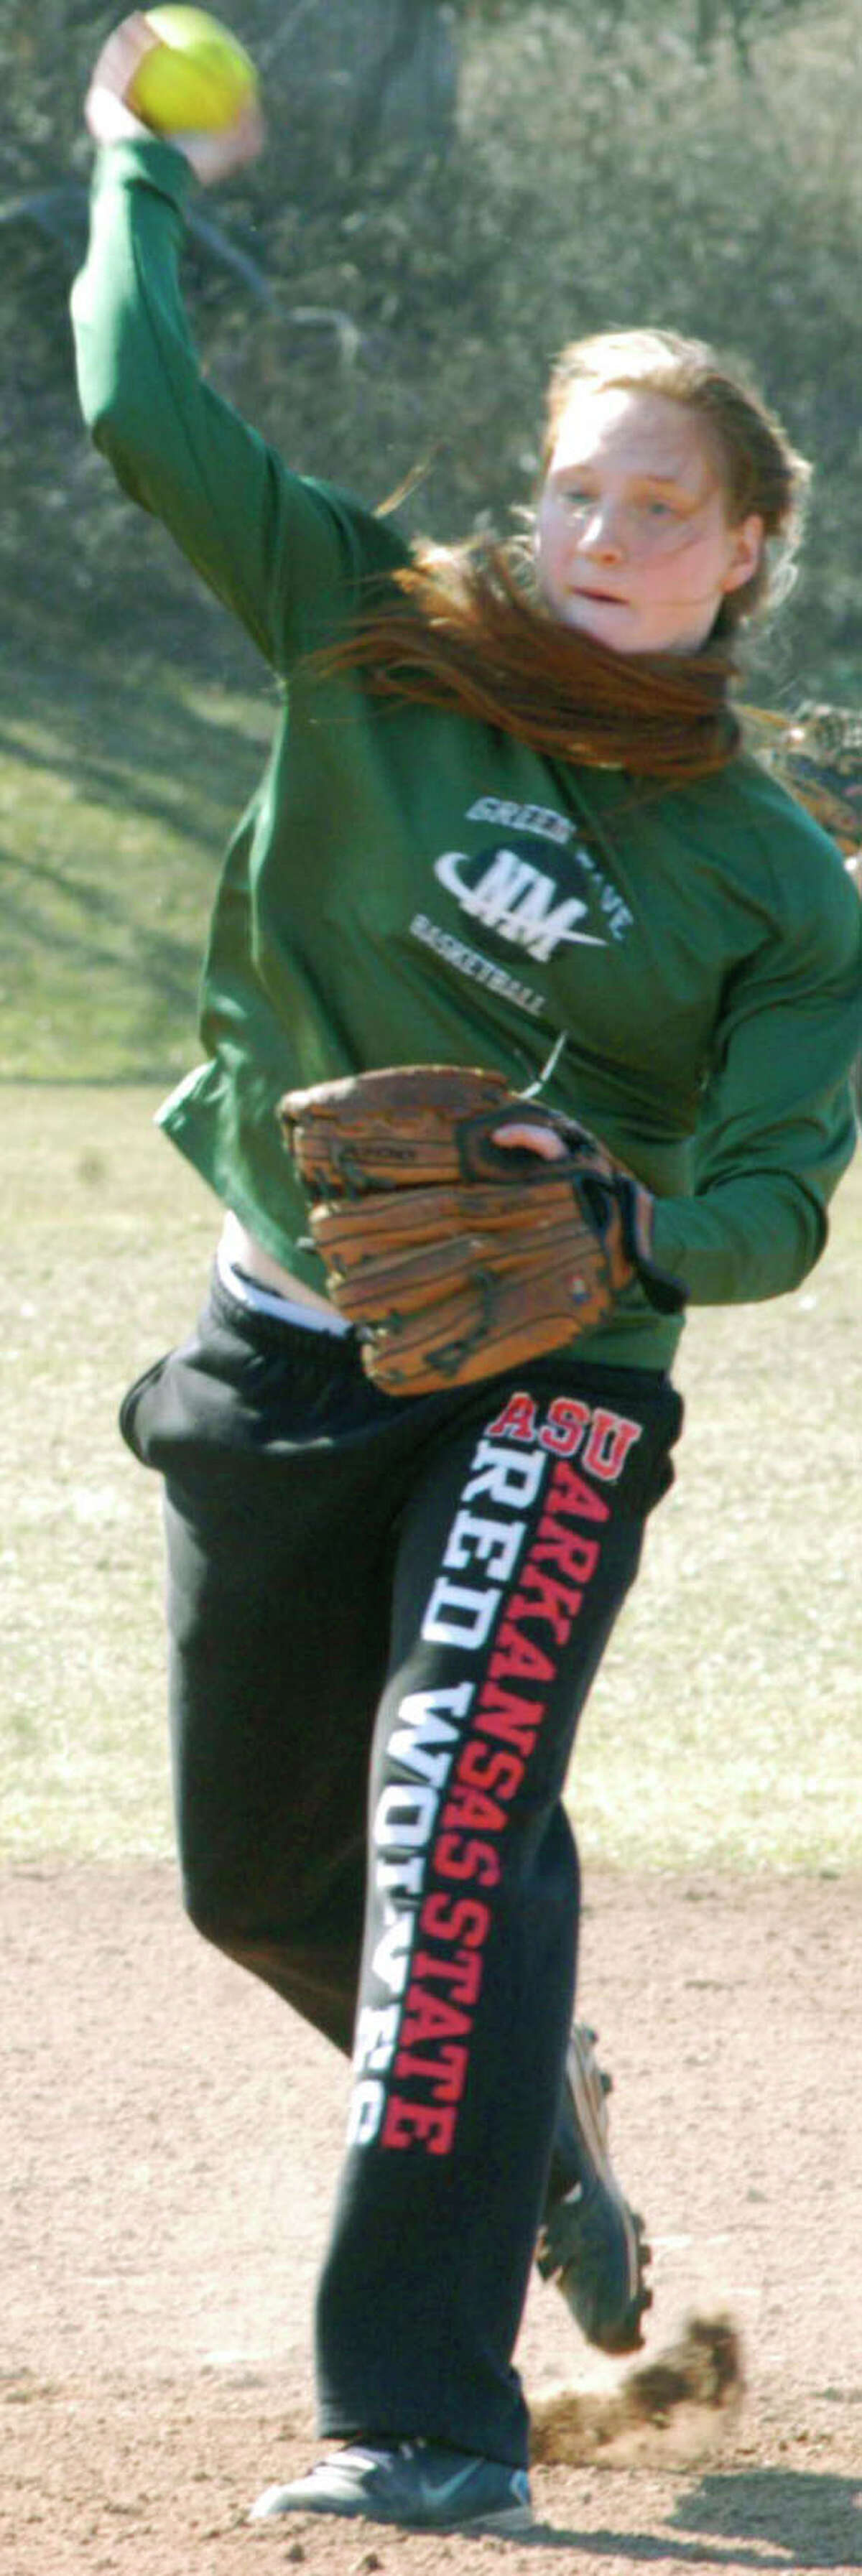 Veteran infielder Maggie Grubb of the Green Wave preps for the 2014 campaign for New Milford High School softball, April 2014